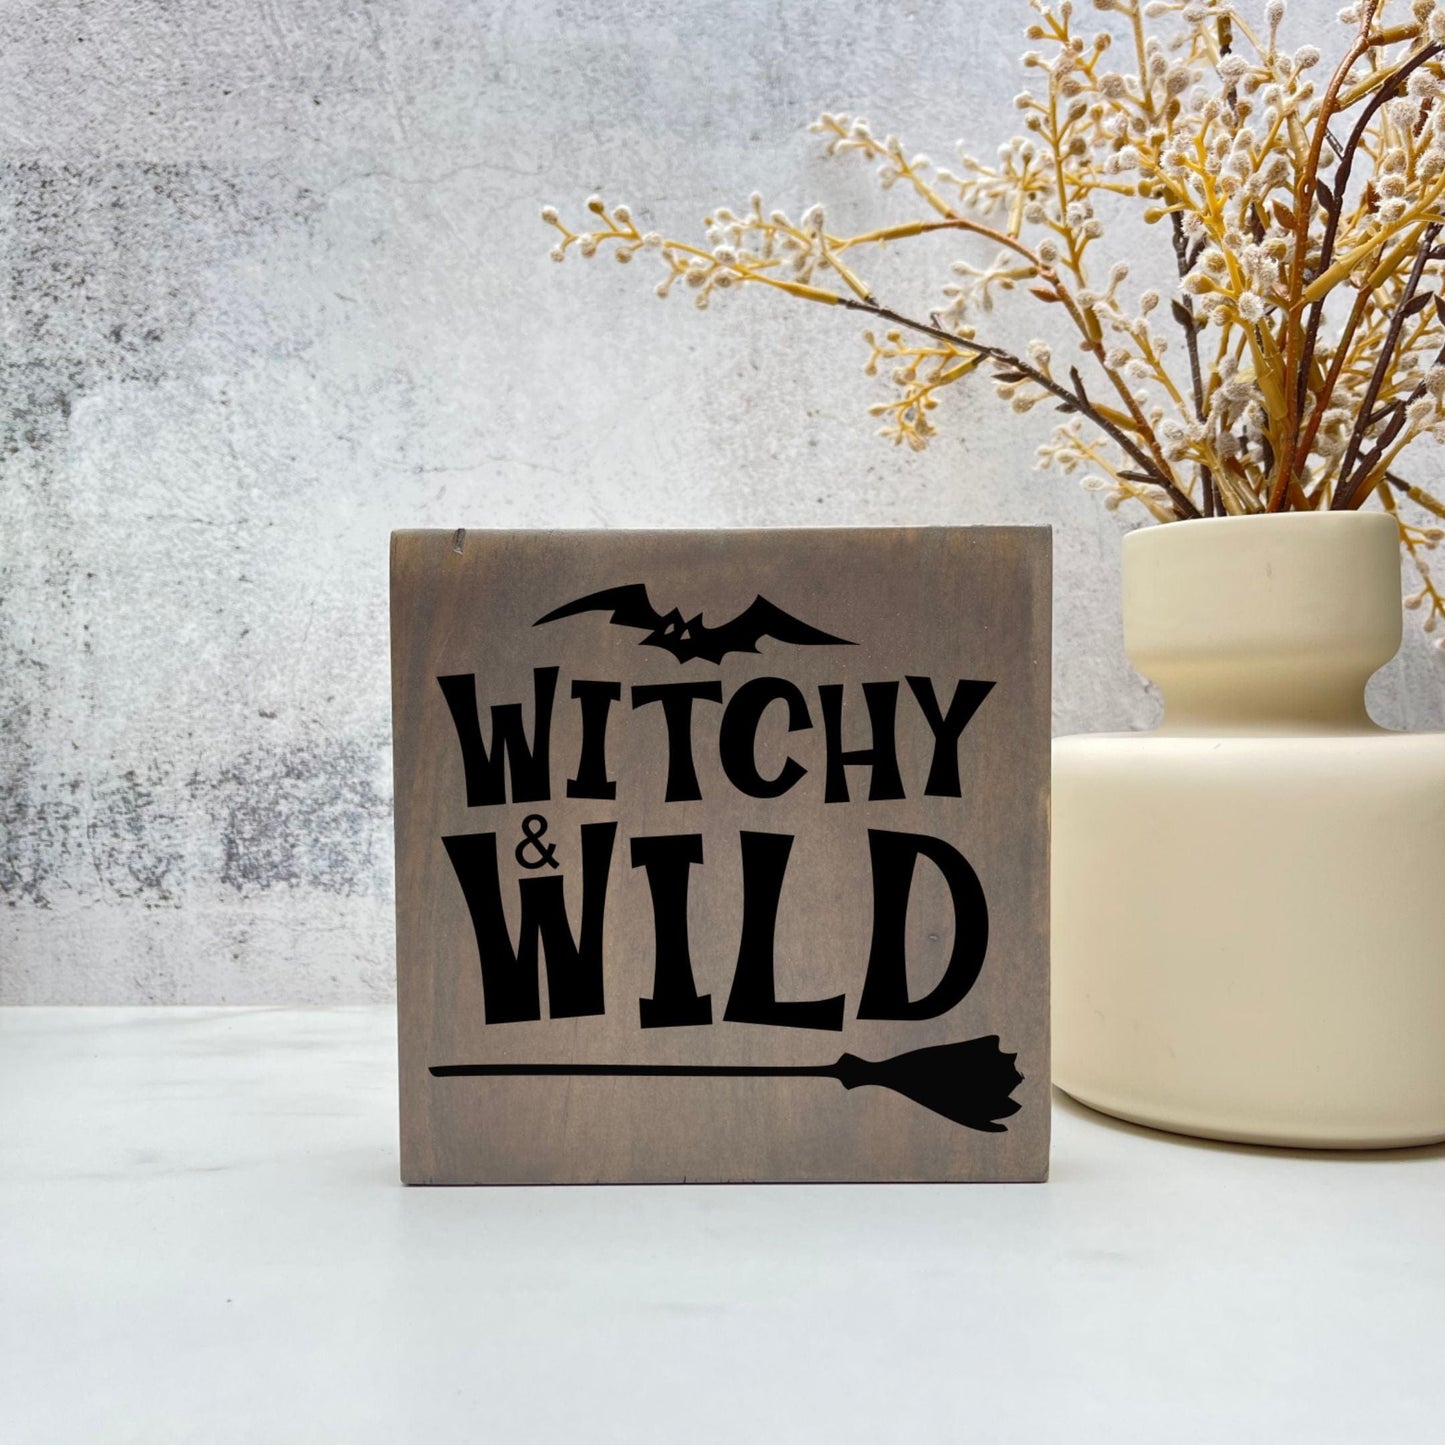 Witchy wild Wood Sign, Halloween Wood Sign, Halloween Home Decor, Spooky Decor